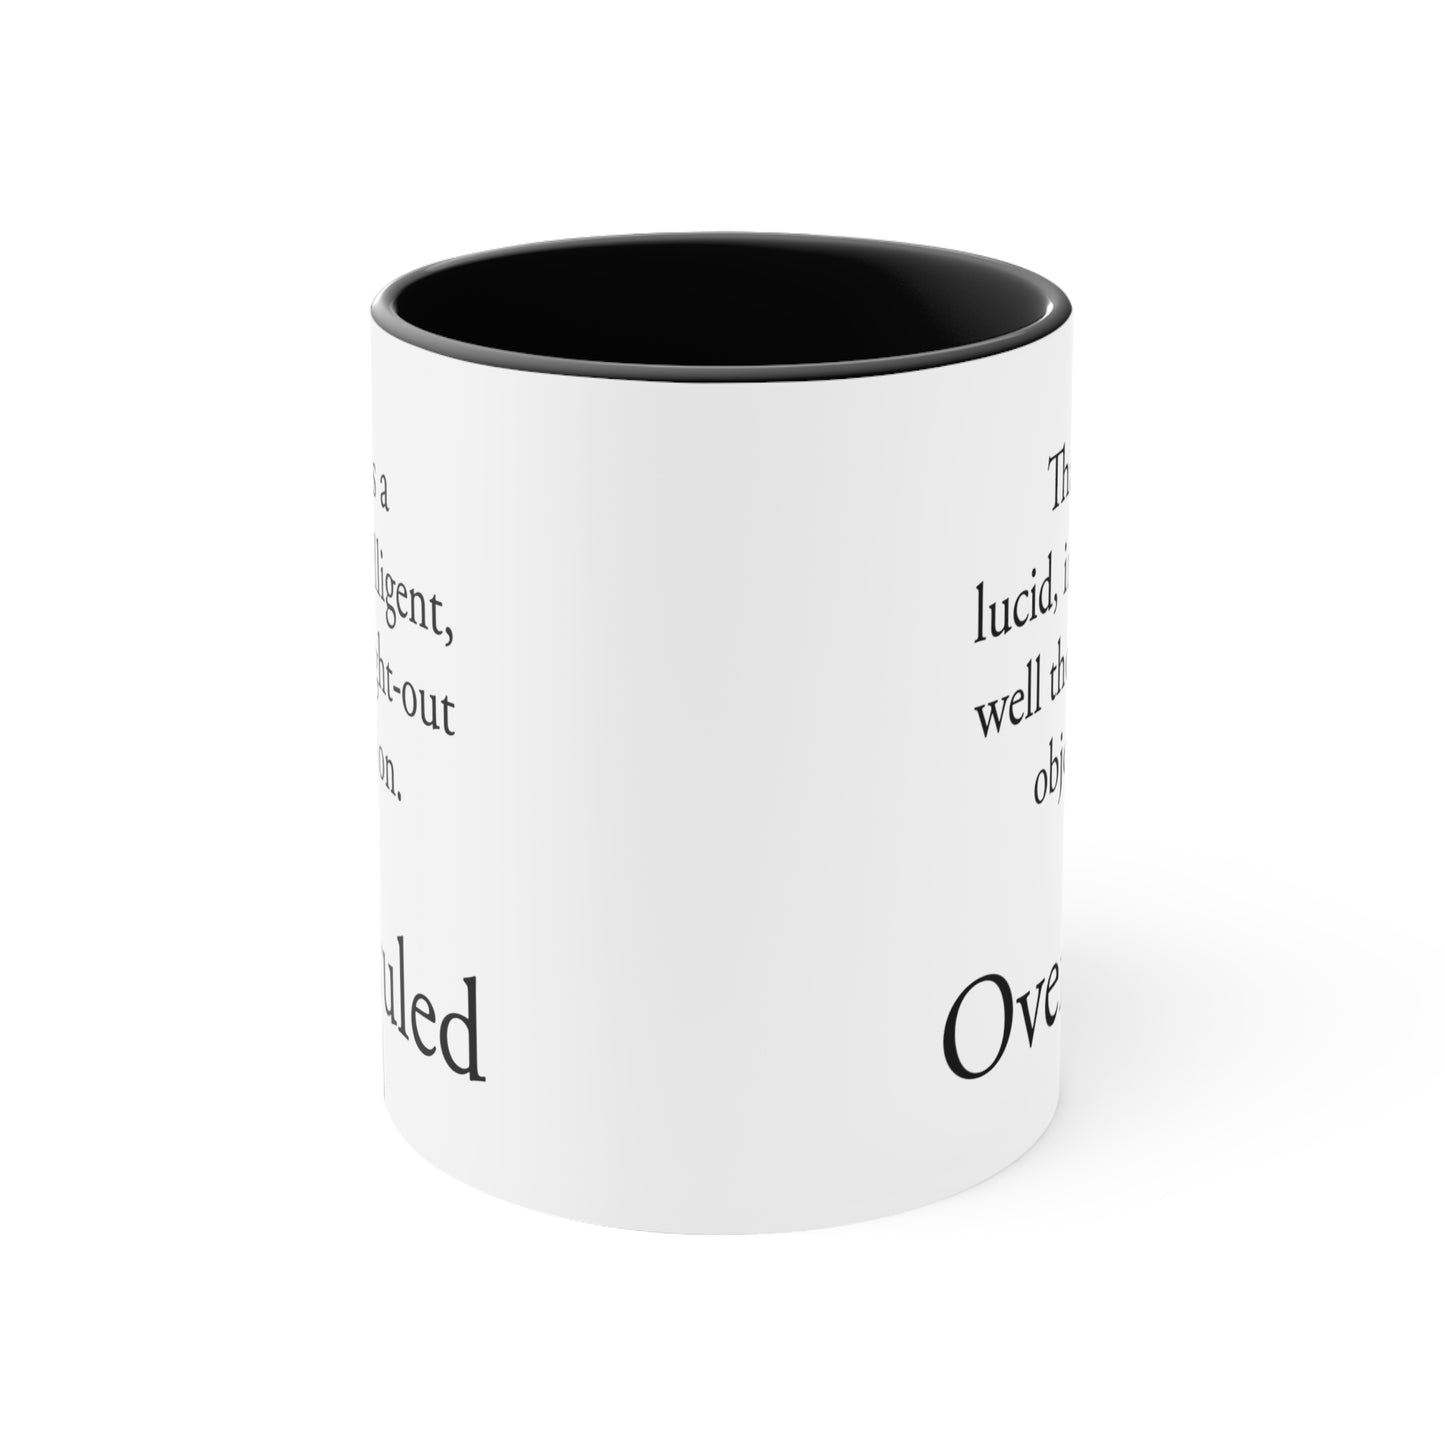 Overruled Coffee Mug - Double Sided Black Accent White Ceramic 11oz by TheGlassyLass